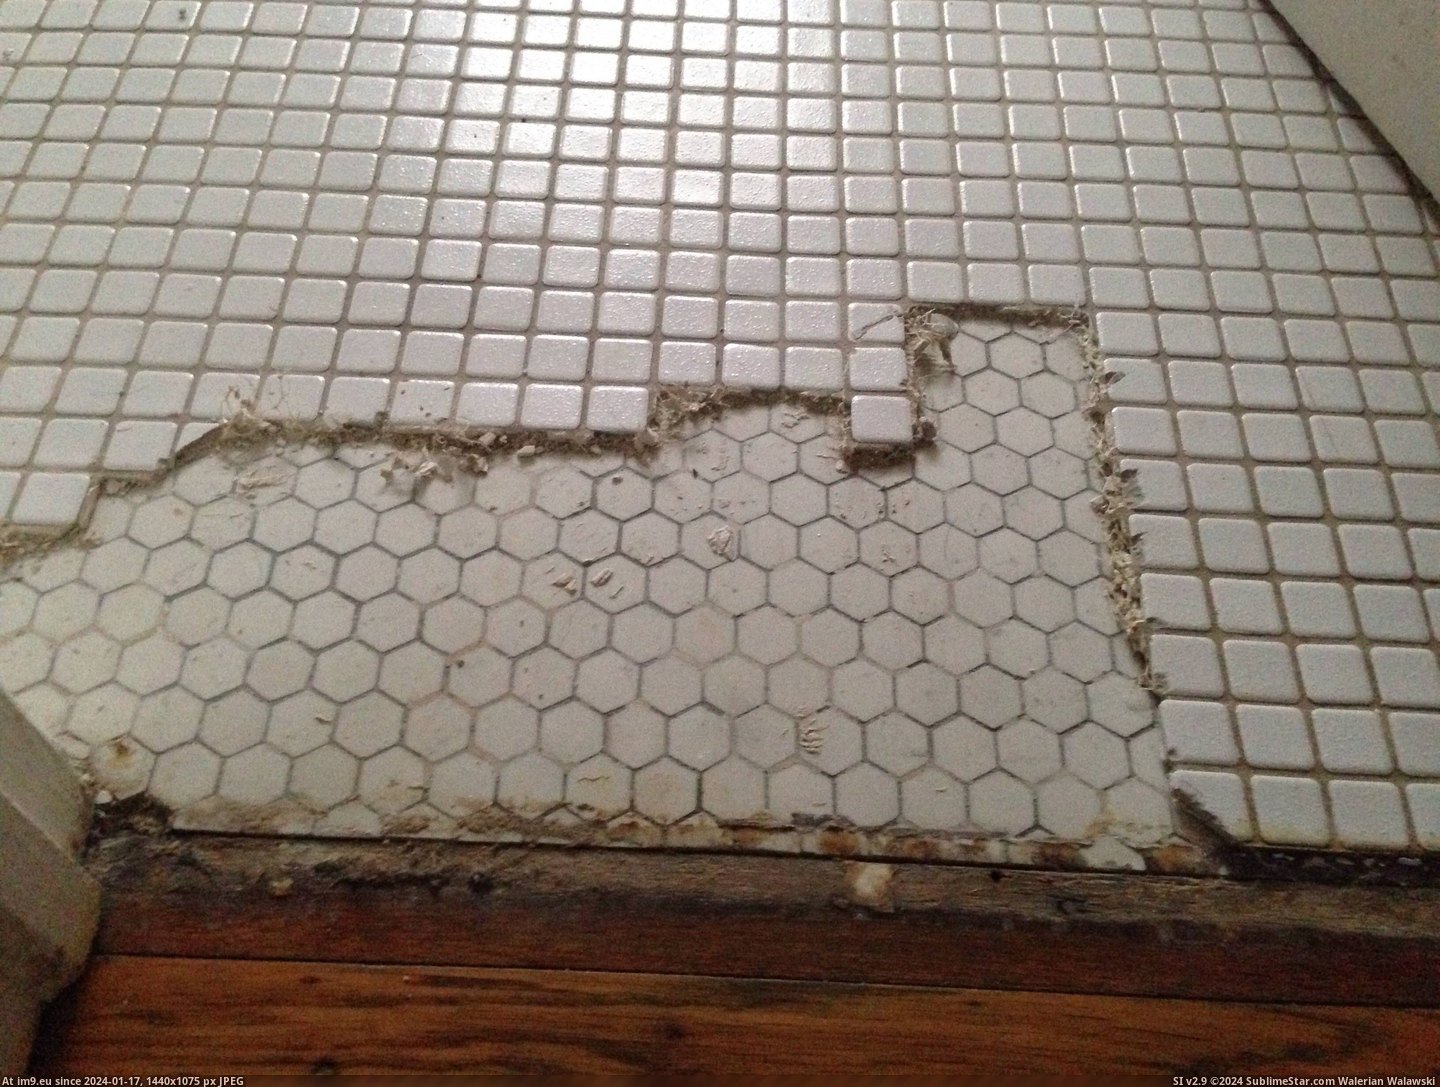 #Time #Wife #Wanted #Tile #Hexagon #Bathroom #Hour #1920s [Pics] My wife and I wanted to redo our 1920s bathroom with more time-appropriate hexagon tile. An hour in, I see this. Pic. (Изображение из альбом My r/PICS favs))